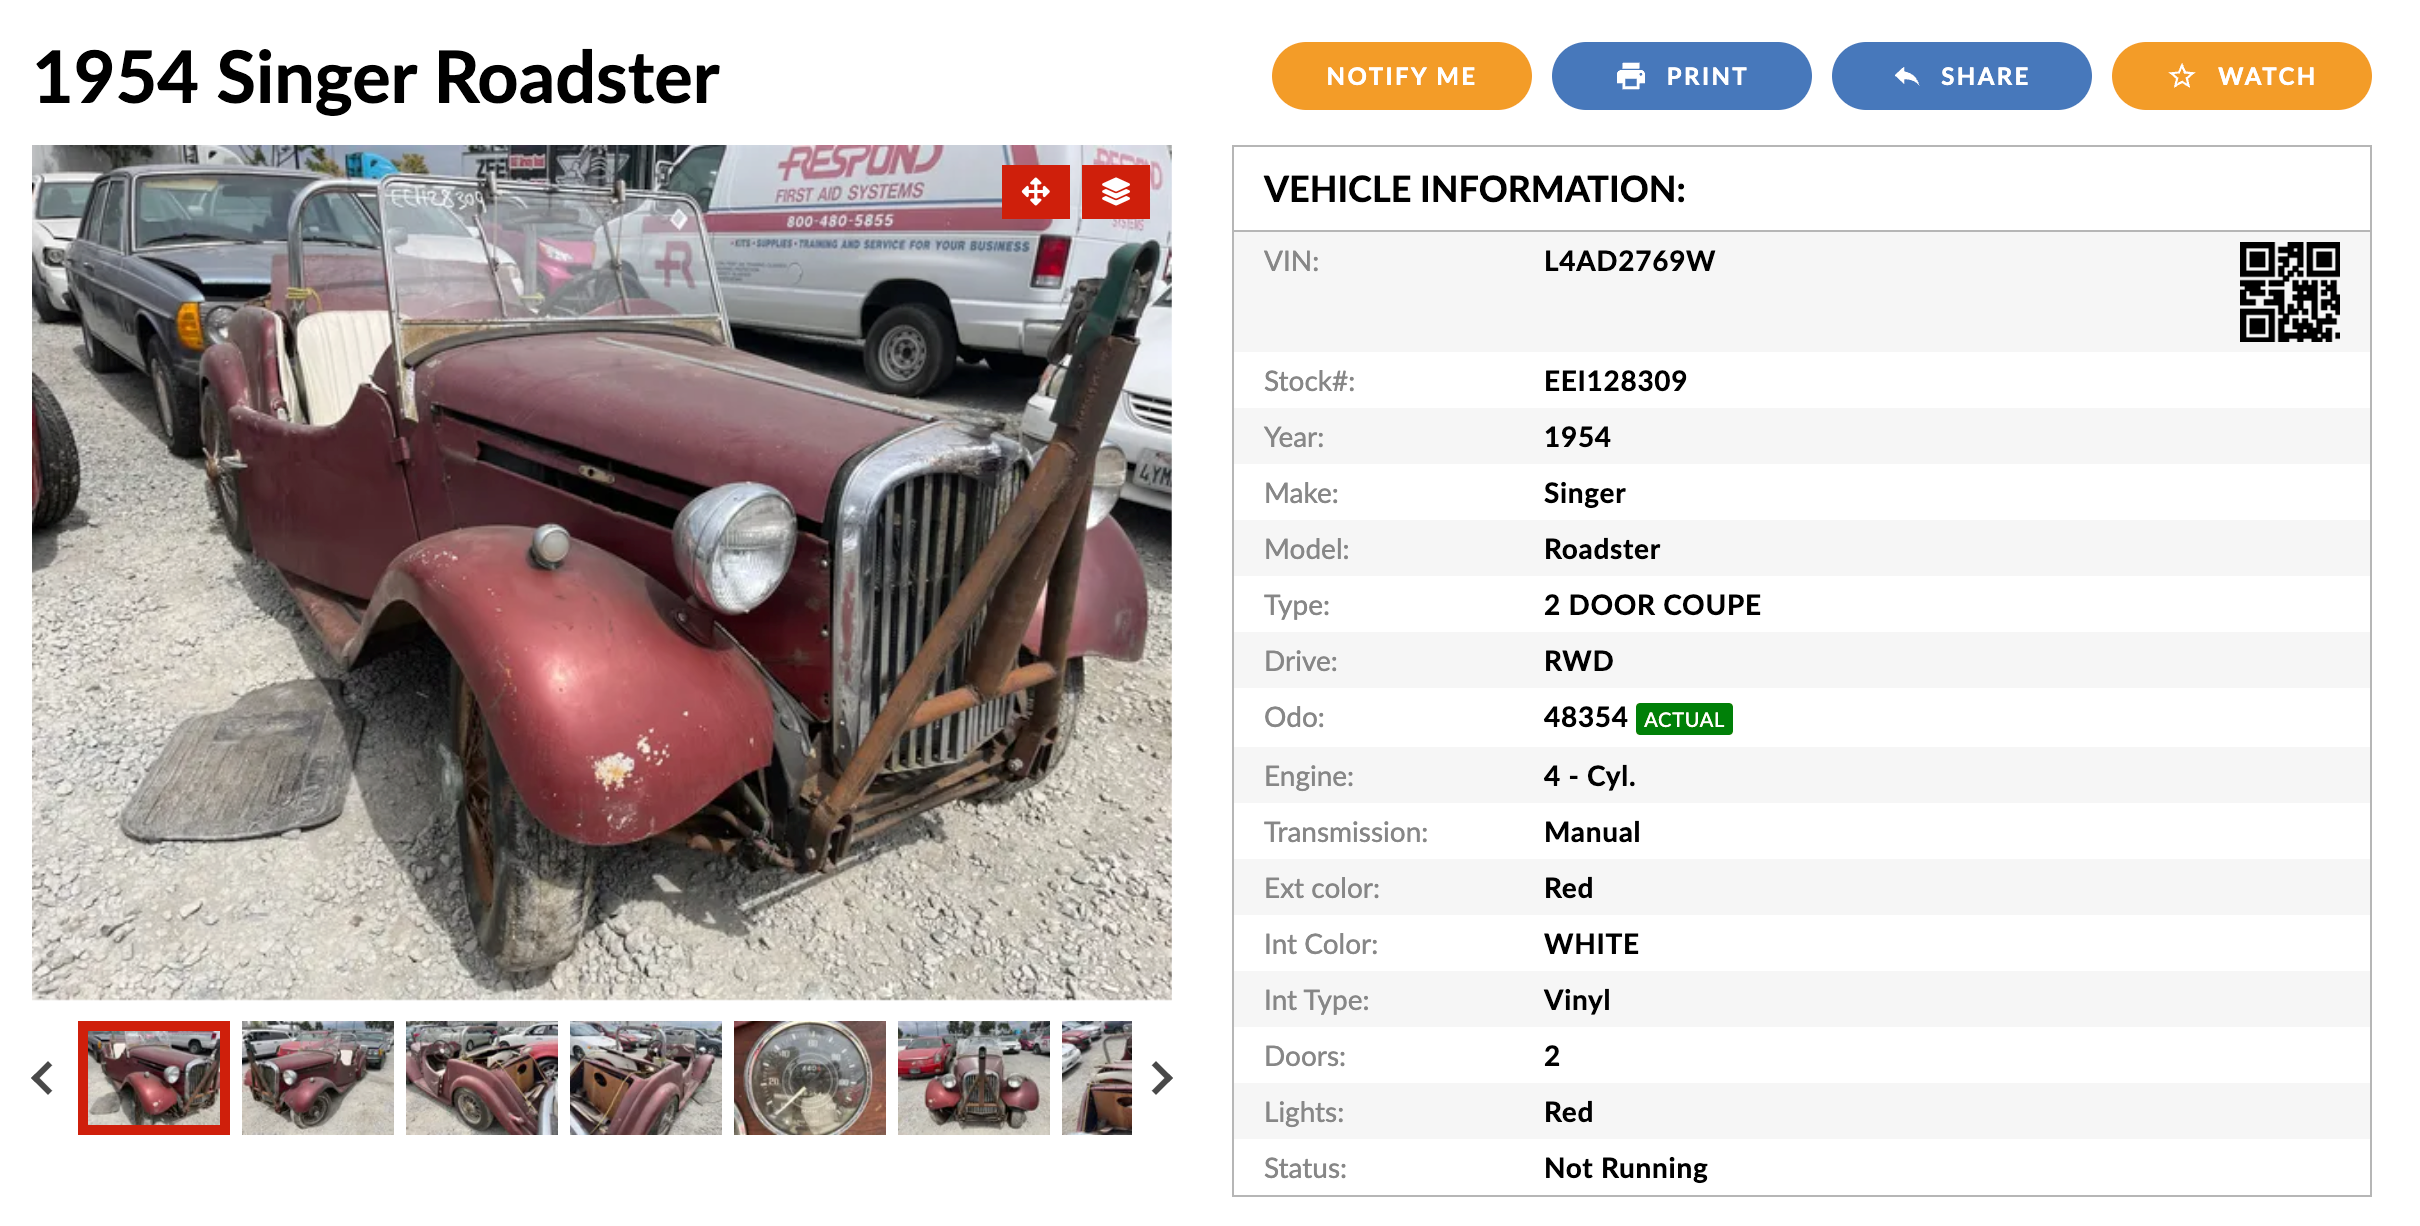 At an auto auction in California, your next classic, commuter, or project car awaits!